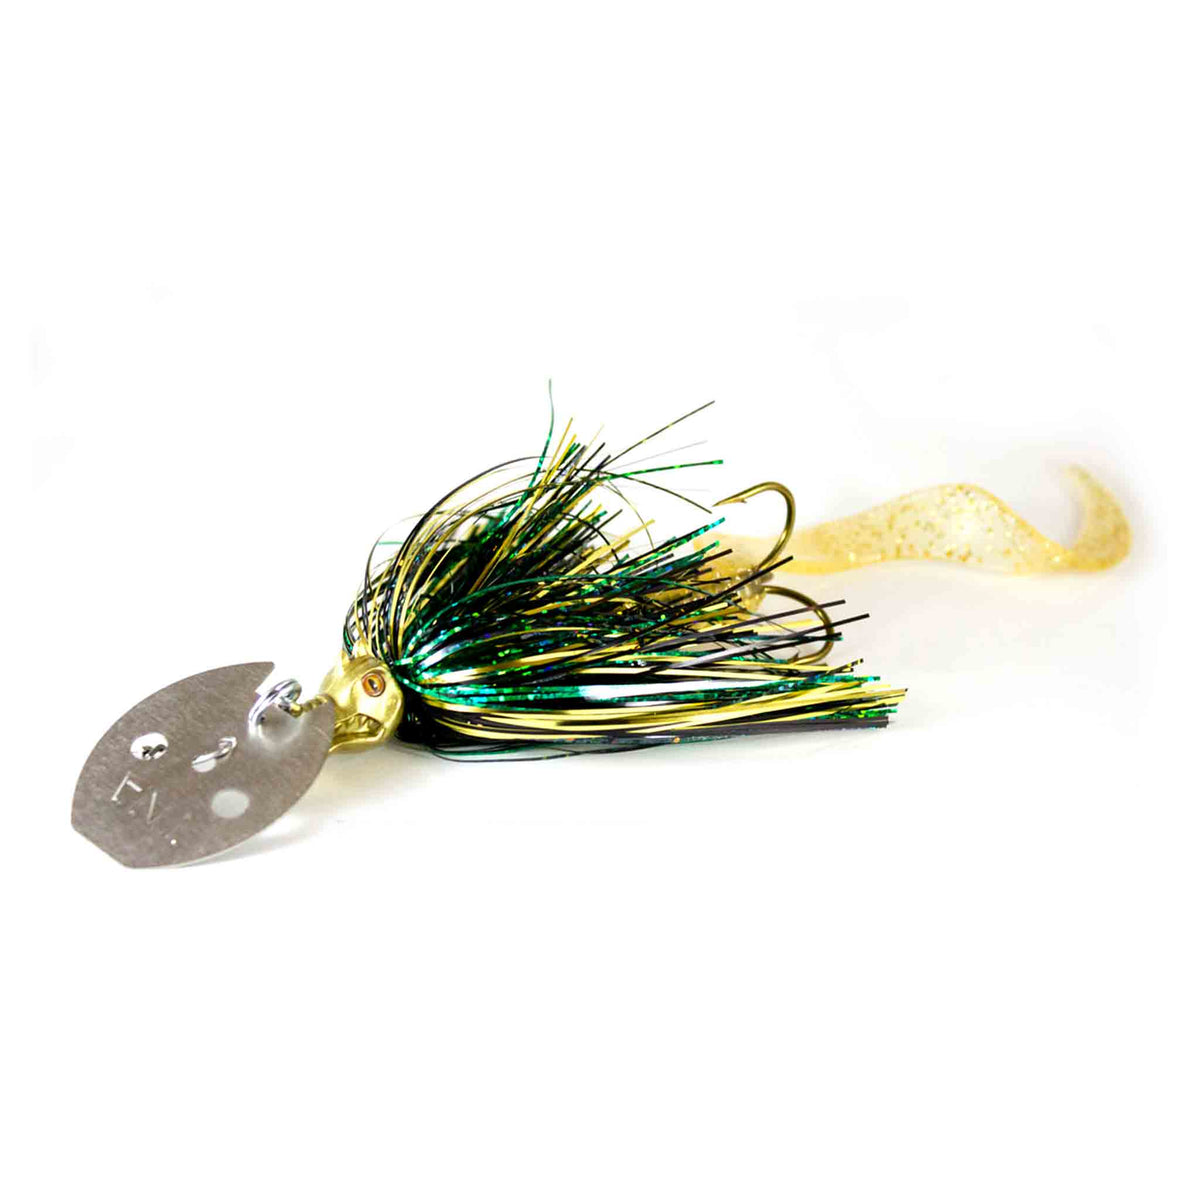 SS Leurres Sky-Candy Chatterbait 3oz